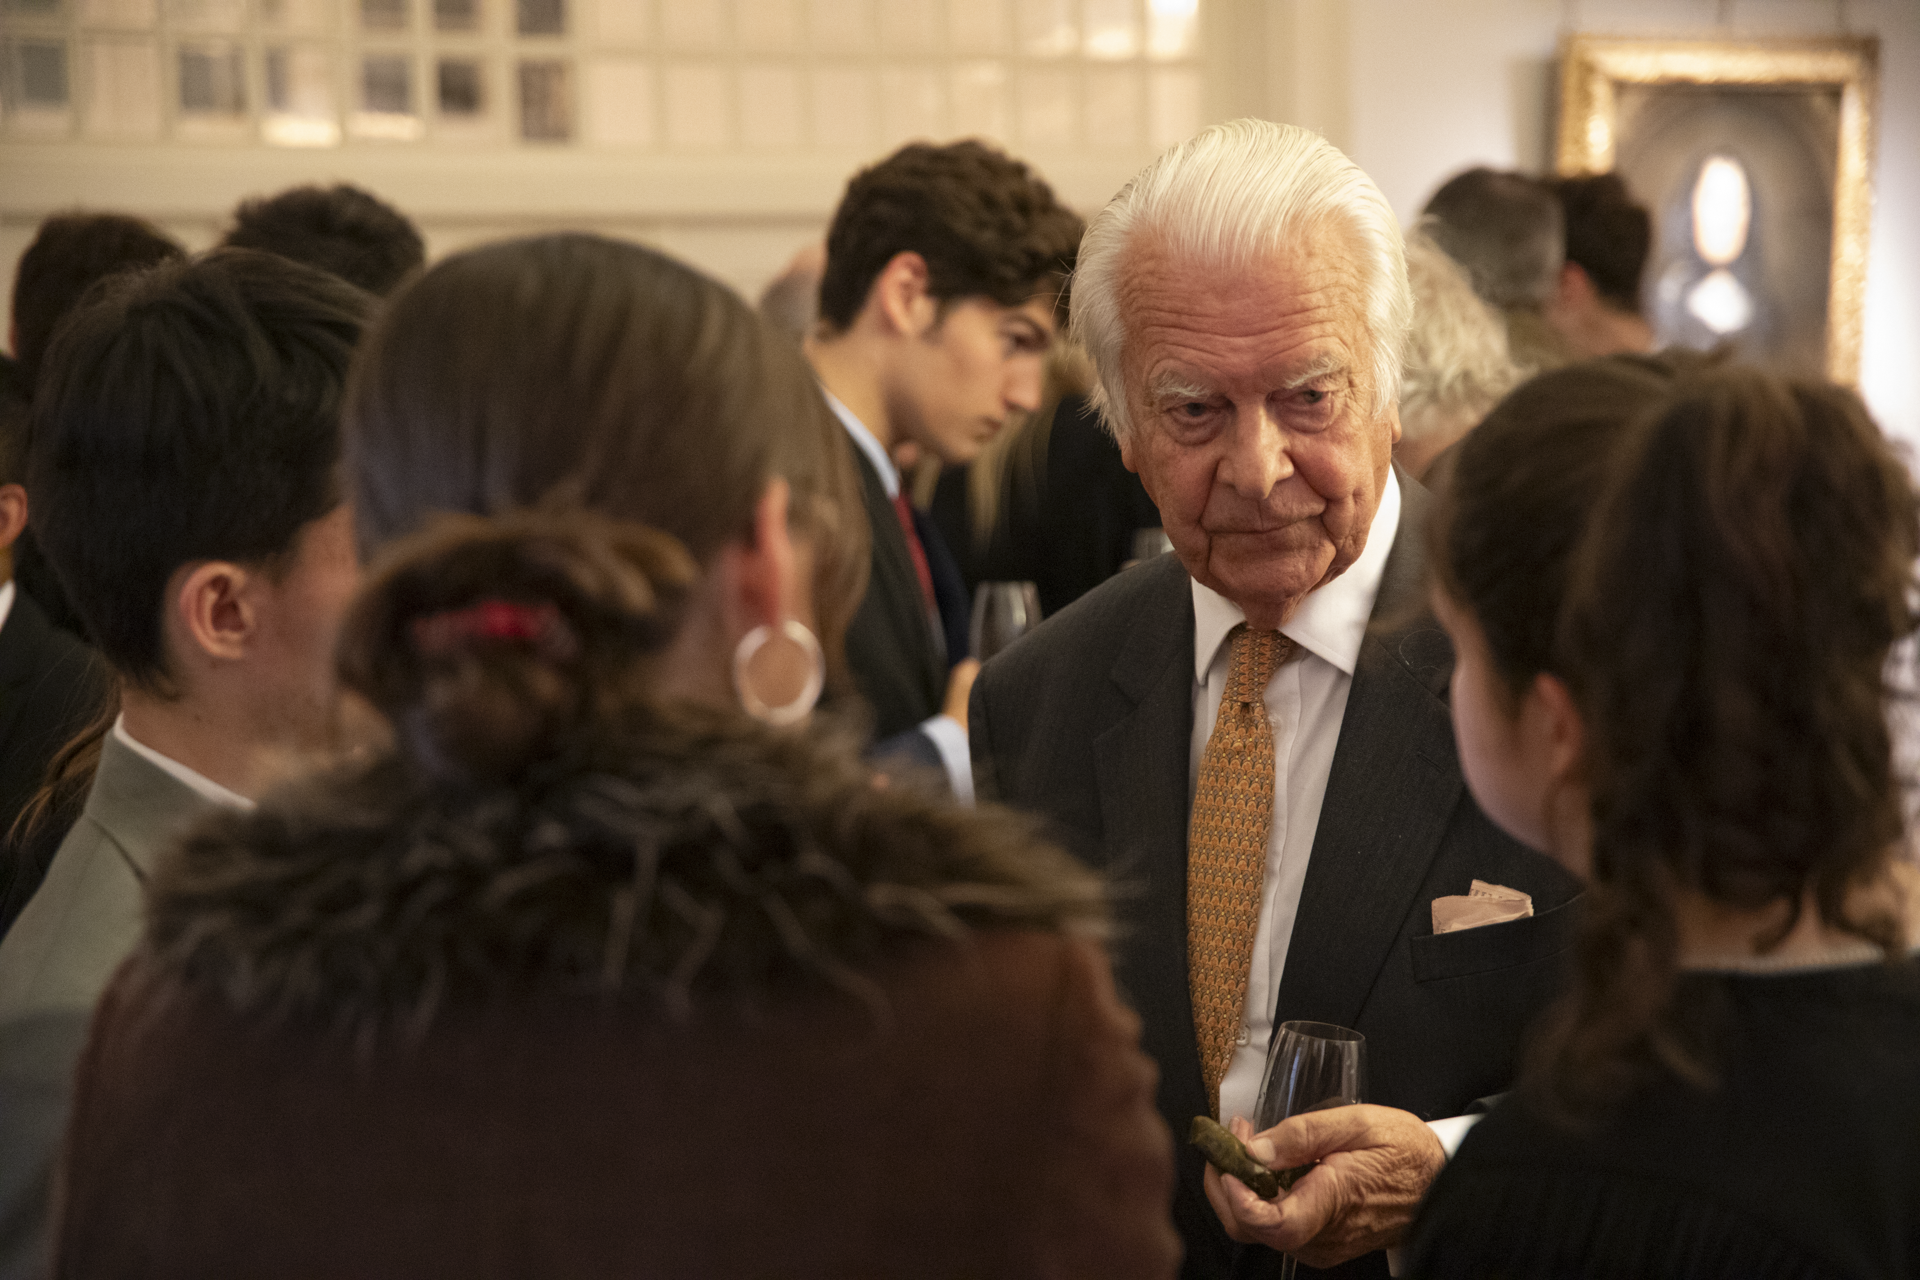 An older man (Lord Owen) speaks to a small group of students at a reception.